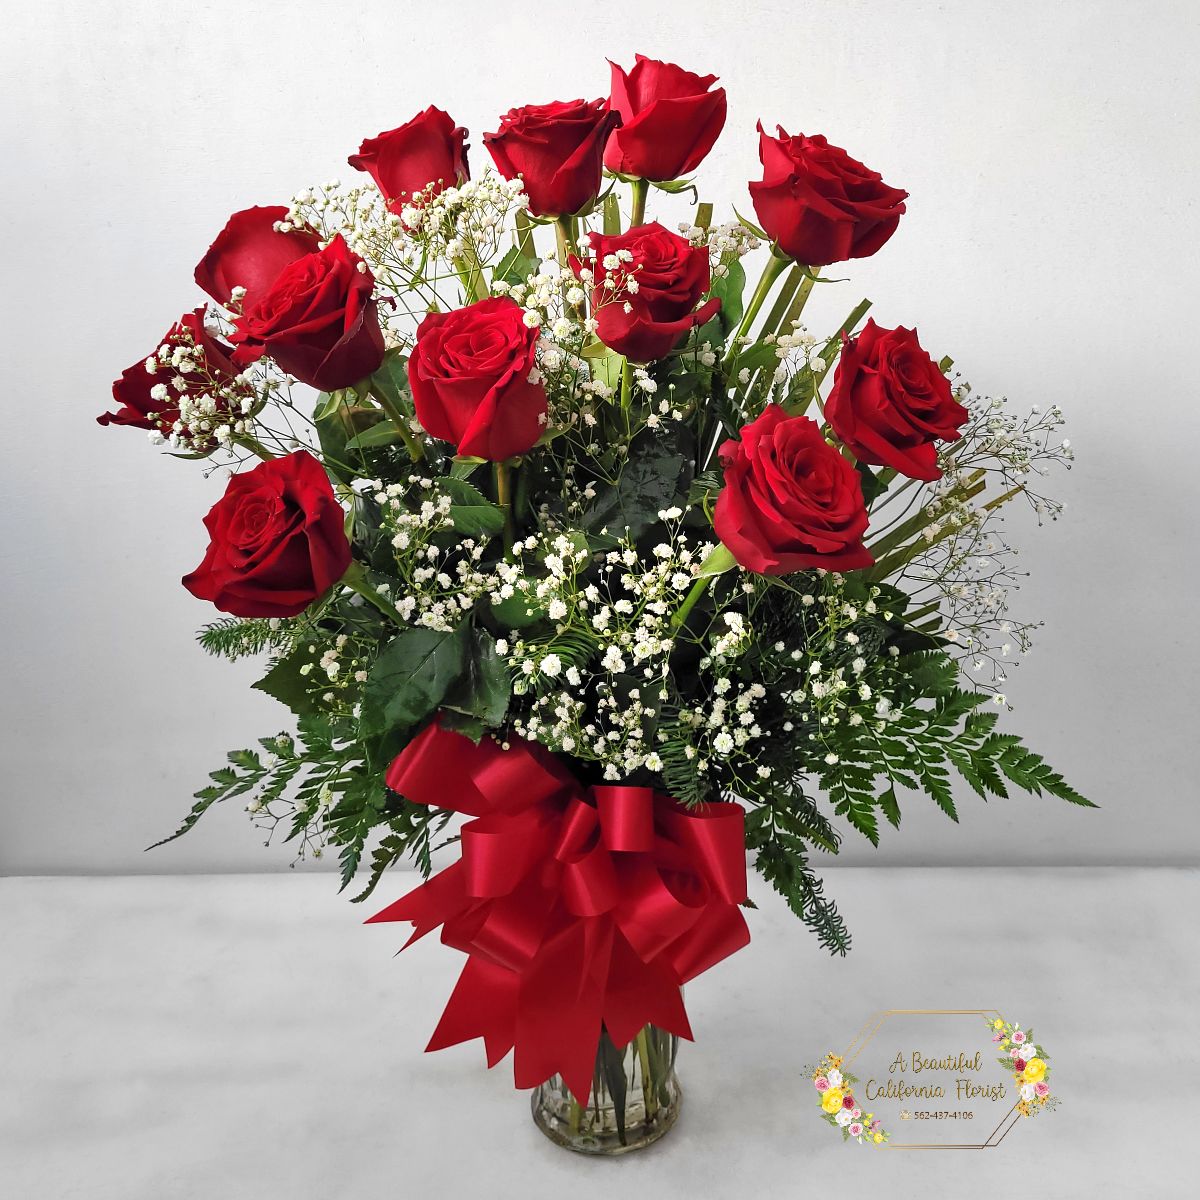 Premium Classic Romance - One Dz Red Roses with Babies Breath and Bow - Upgrade to our Premium Classic Romance - One (1) Dozen long stem RED roses, accented with lush greens. We enhance the arrangement with the addition of beautiful fluffy white babies breath. And as a finishing touch add a Red Satin Bow, to make it pop!   The perfect dozen for Valentine's Day, Love, Anniversary, or Just Because...   Approximate size: 28&quot; Tall x 22&quot; Wide   Red Roses, same day delivery from Long Beach's favorite flower shop, A Beautiful California Florist